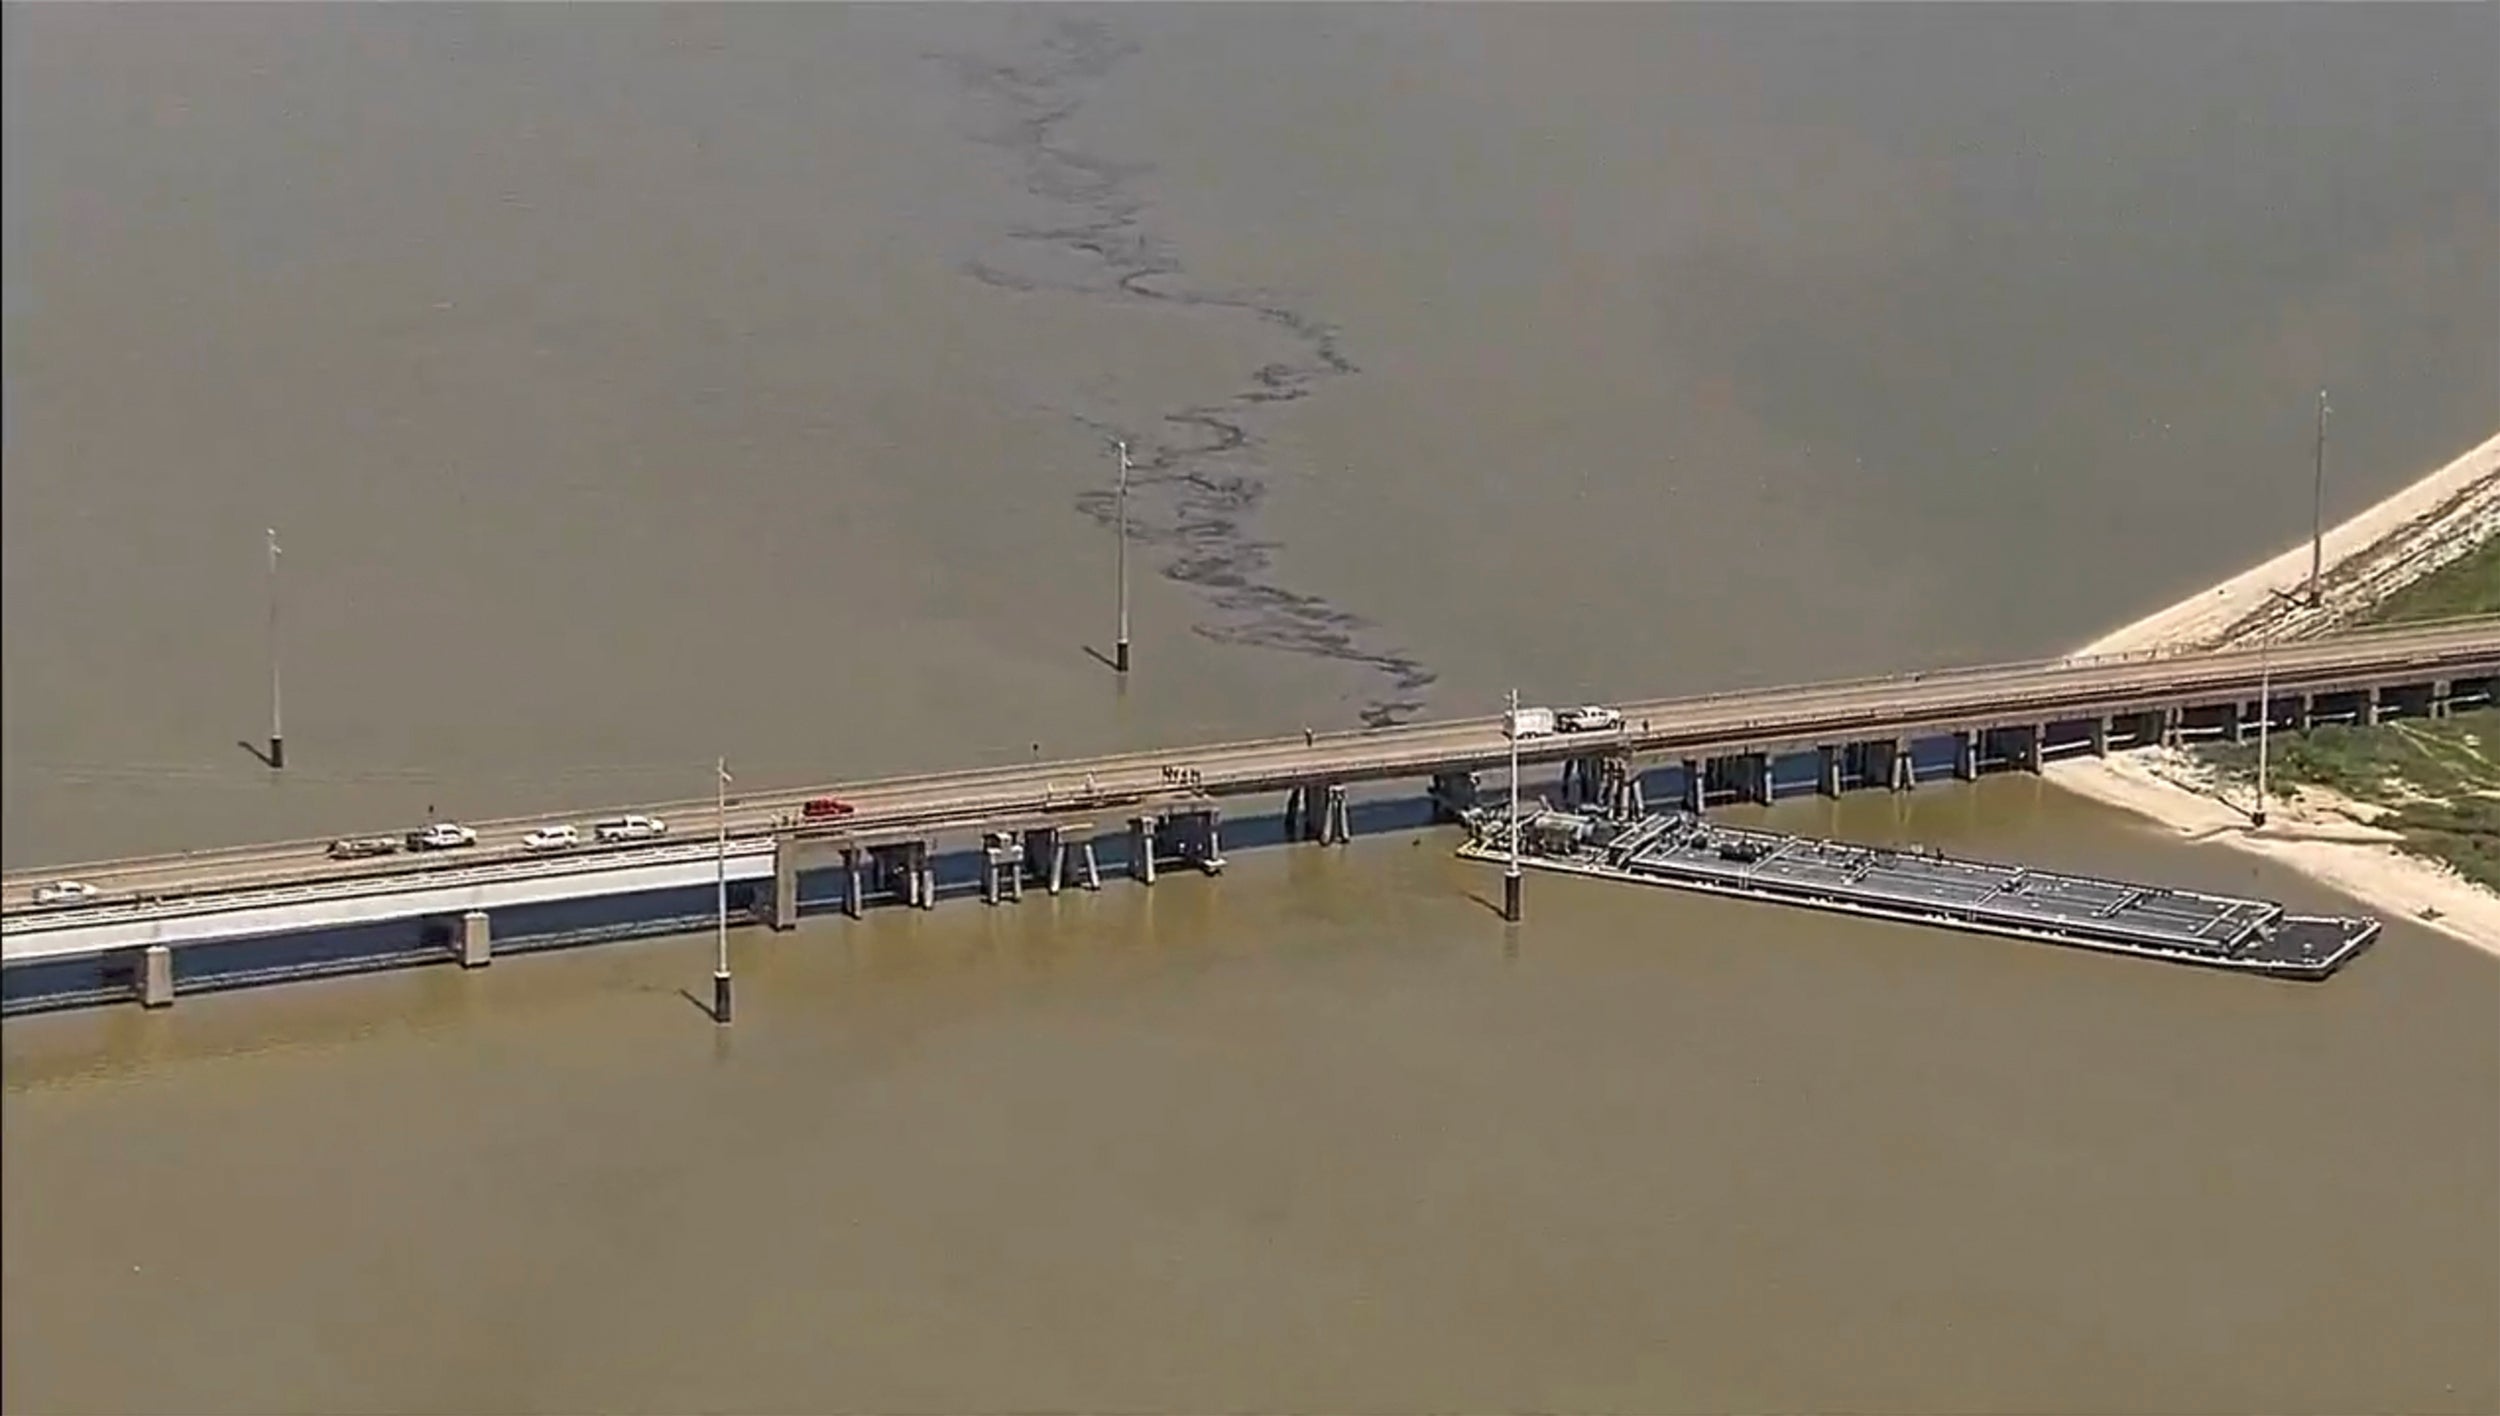 A bridge in Galveston Texas was hit by a barge on Wednesday, causing part of an attached railway to collapse